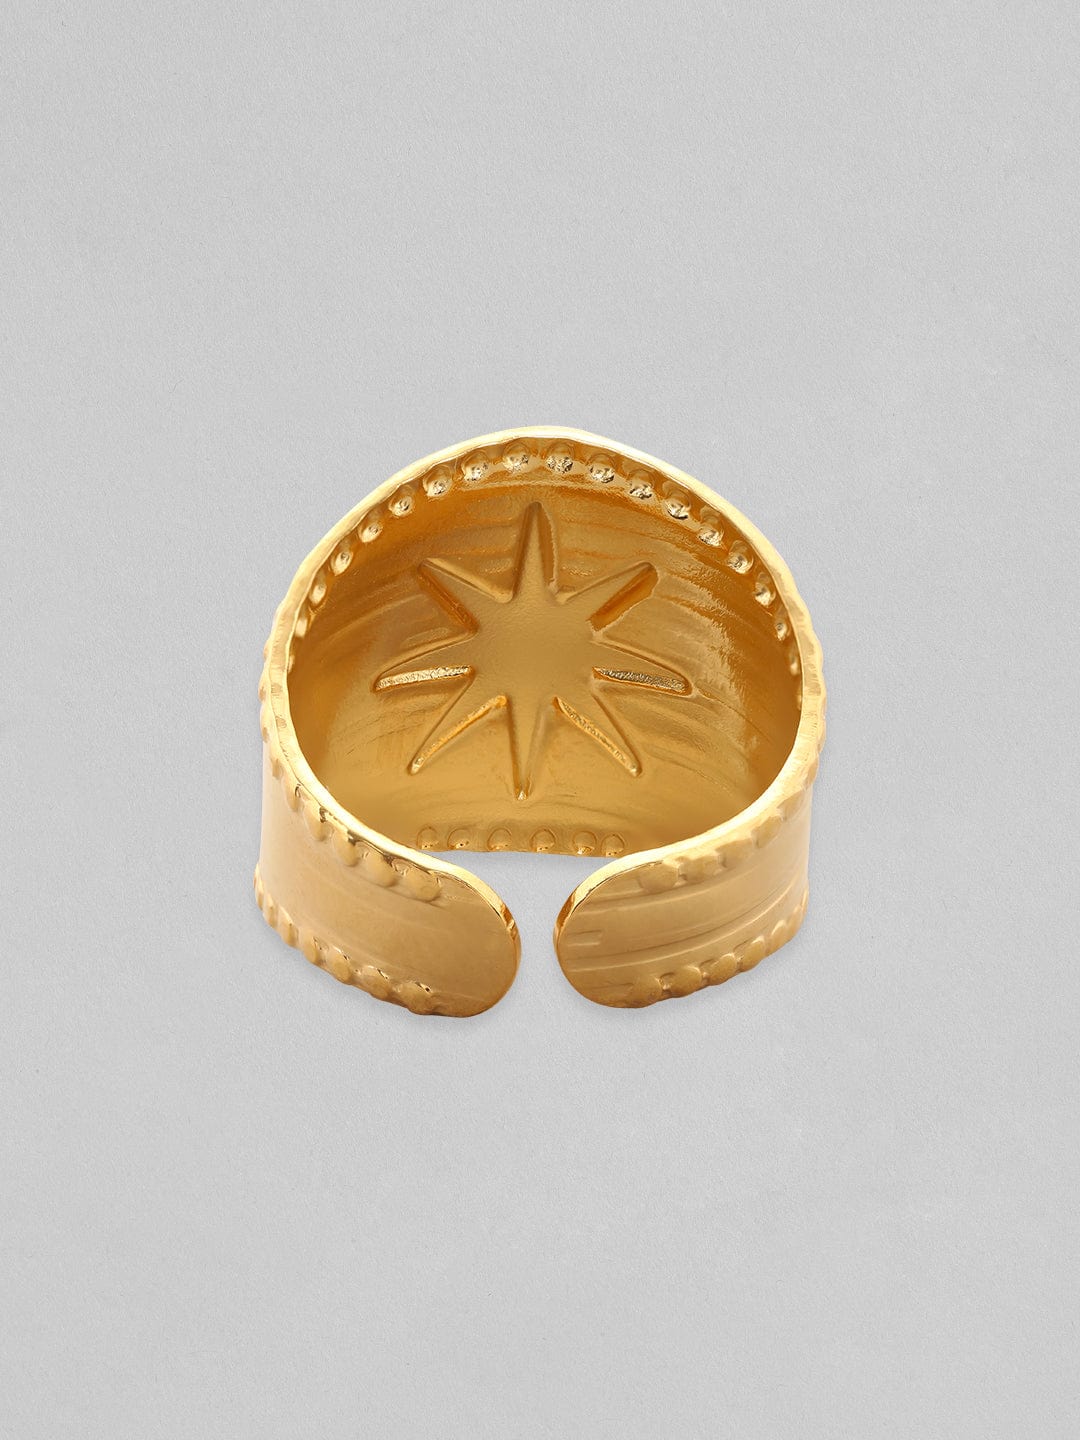 Rubans Voguish 18K Gold Plated Stainless Steel Star Stamped Adjustable Ring. Rings